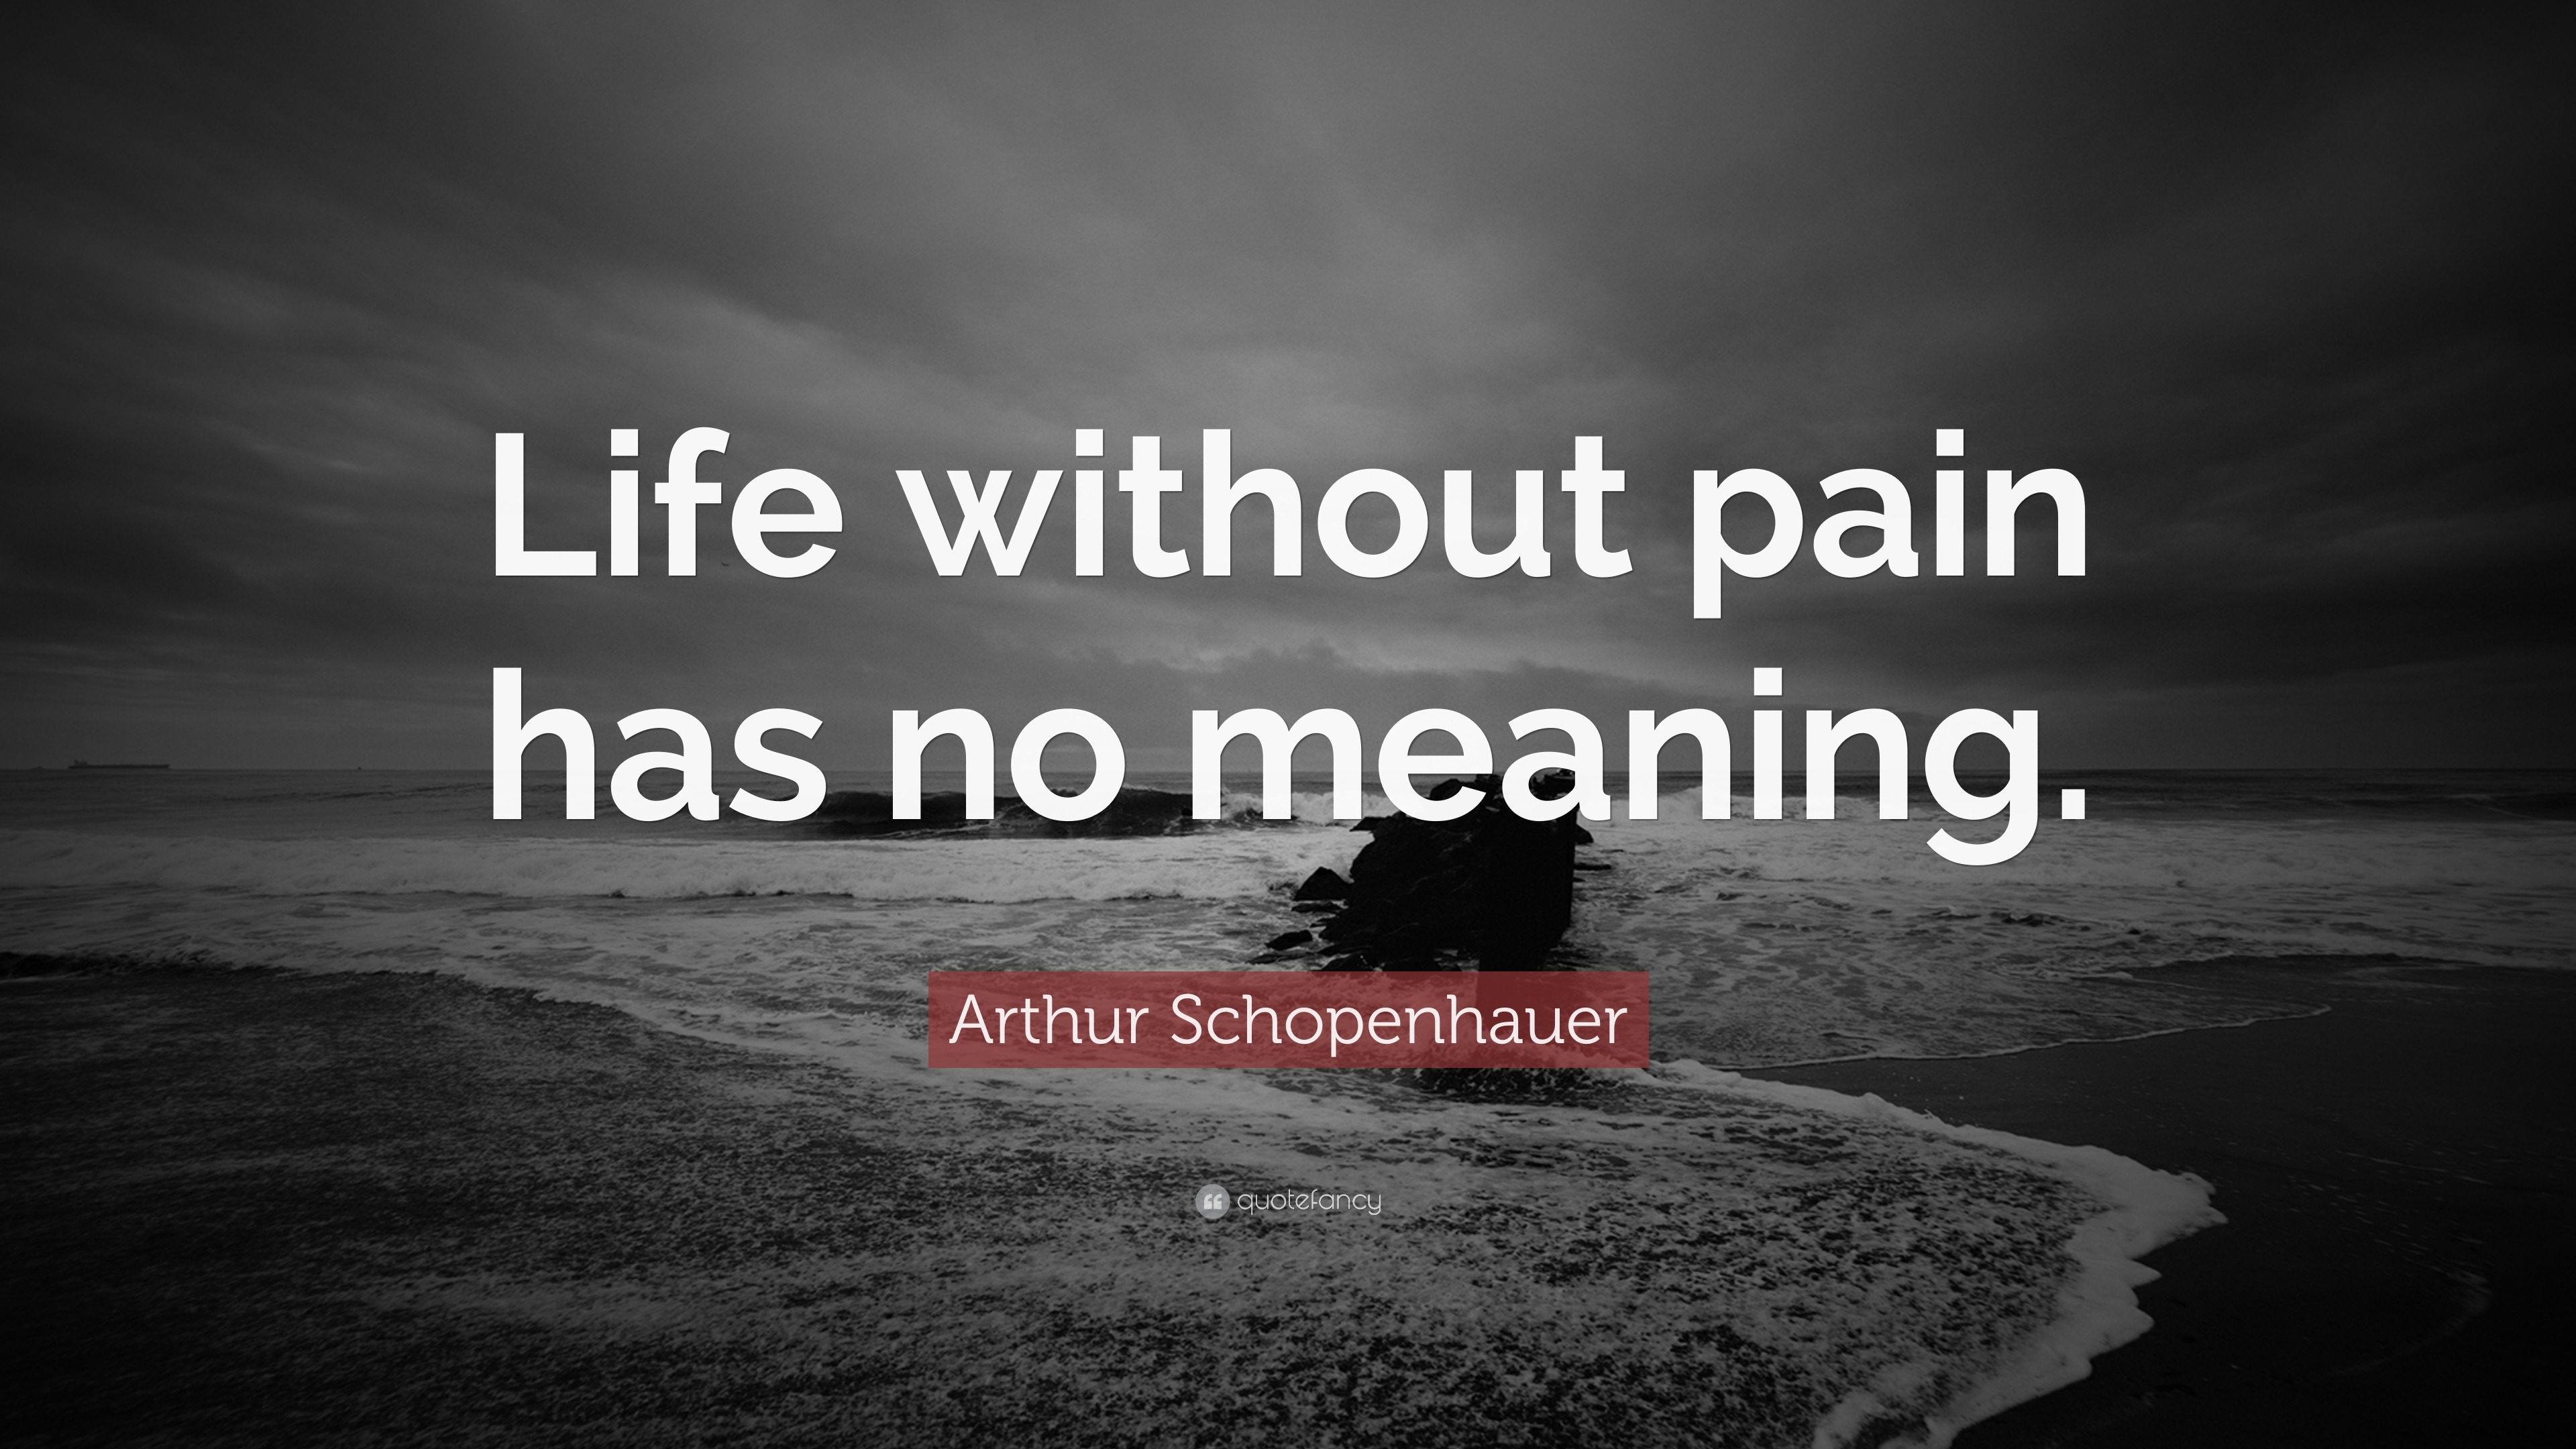 Arthur Schopenhauer Quote “Life without pain has no meaning ”